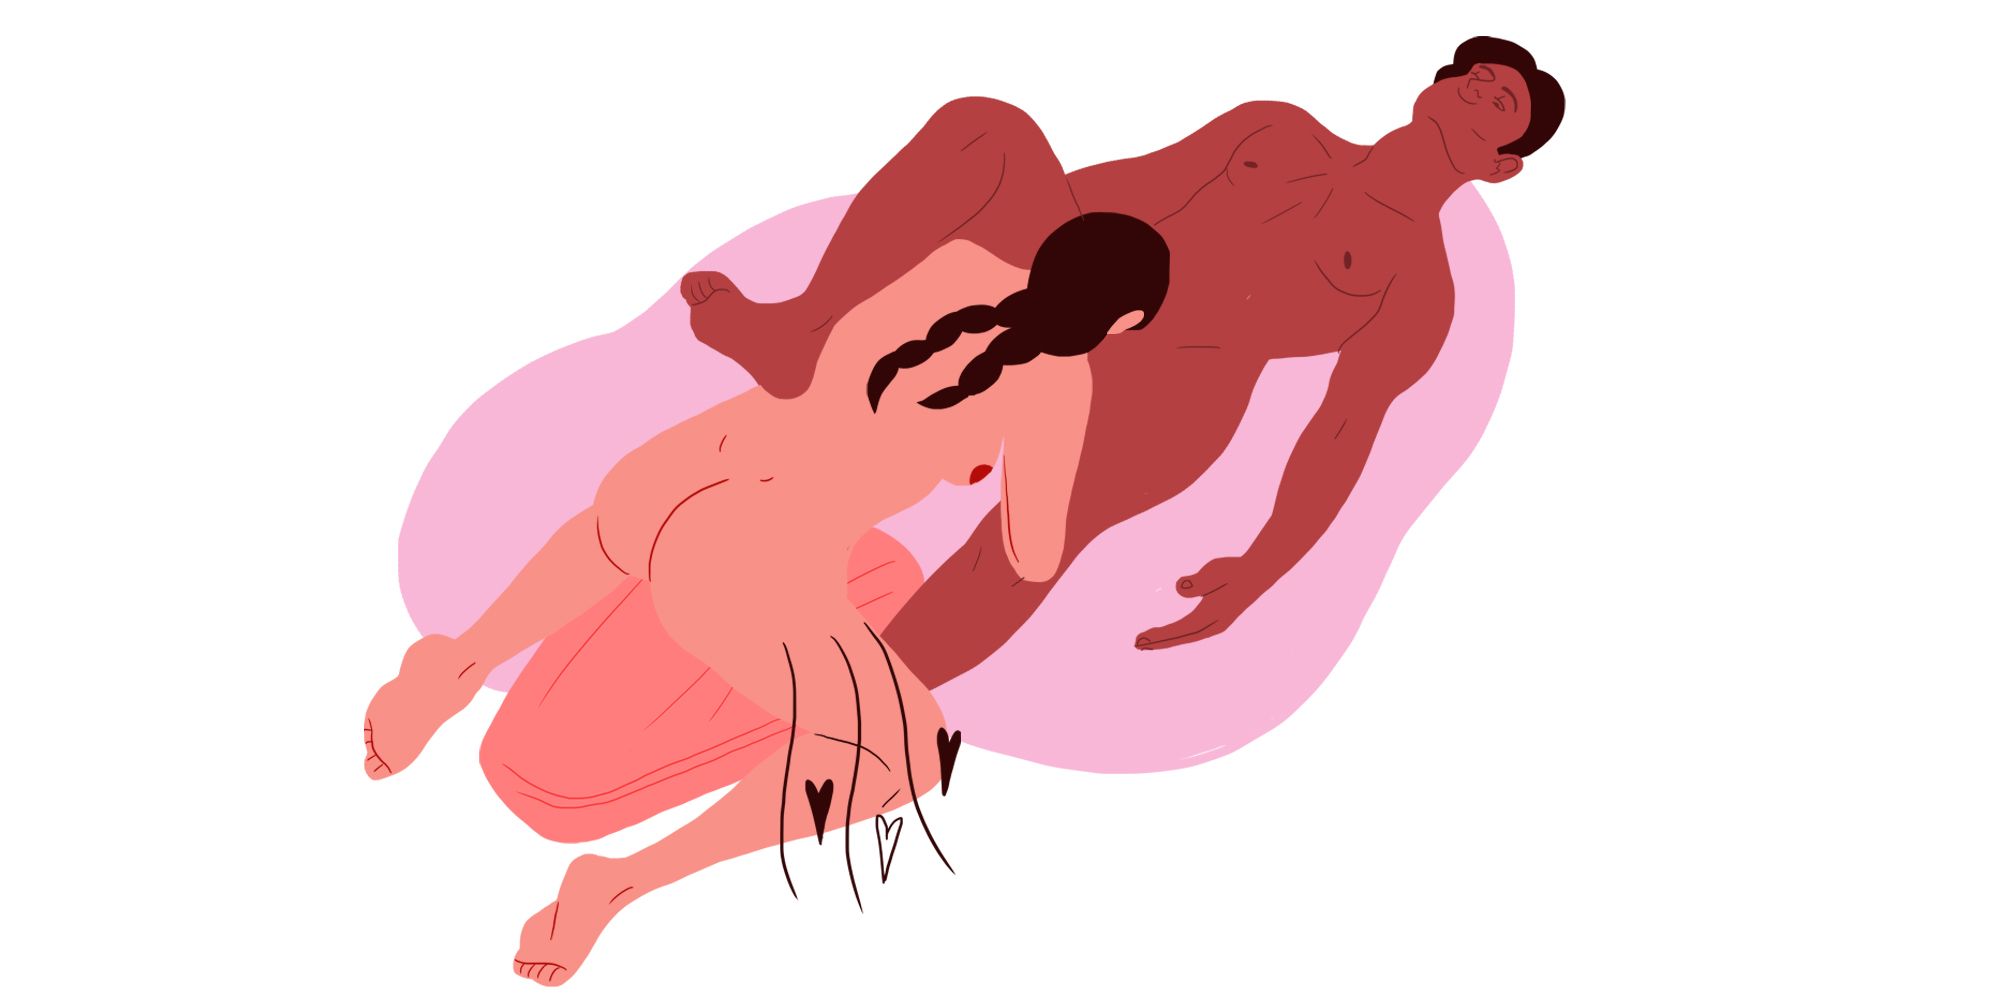 Differenct intercourse and oral sex positions